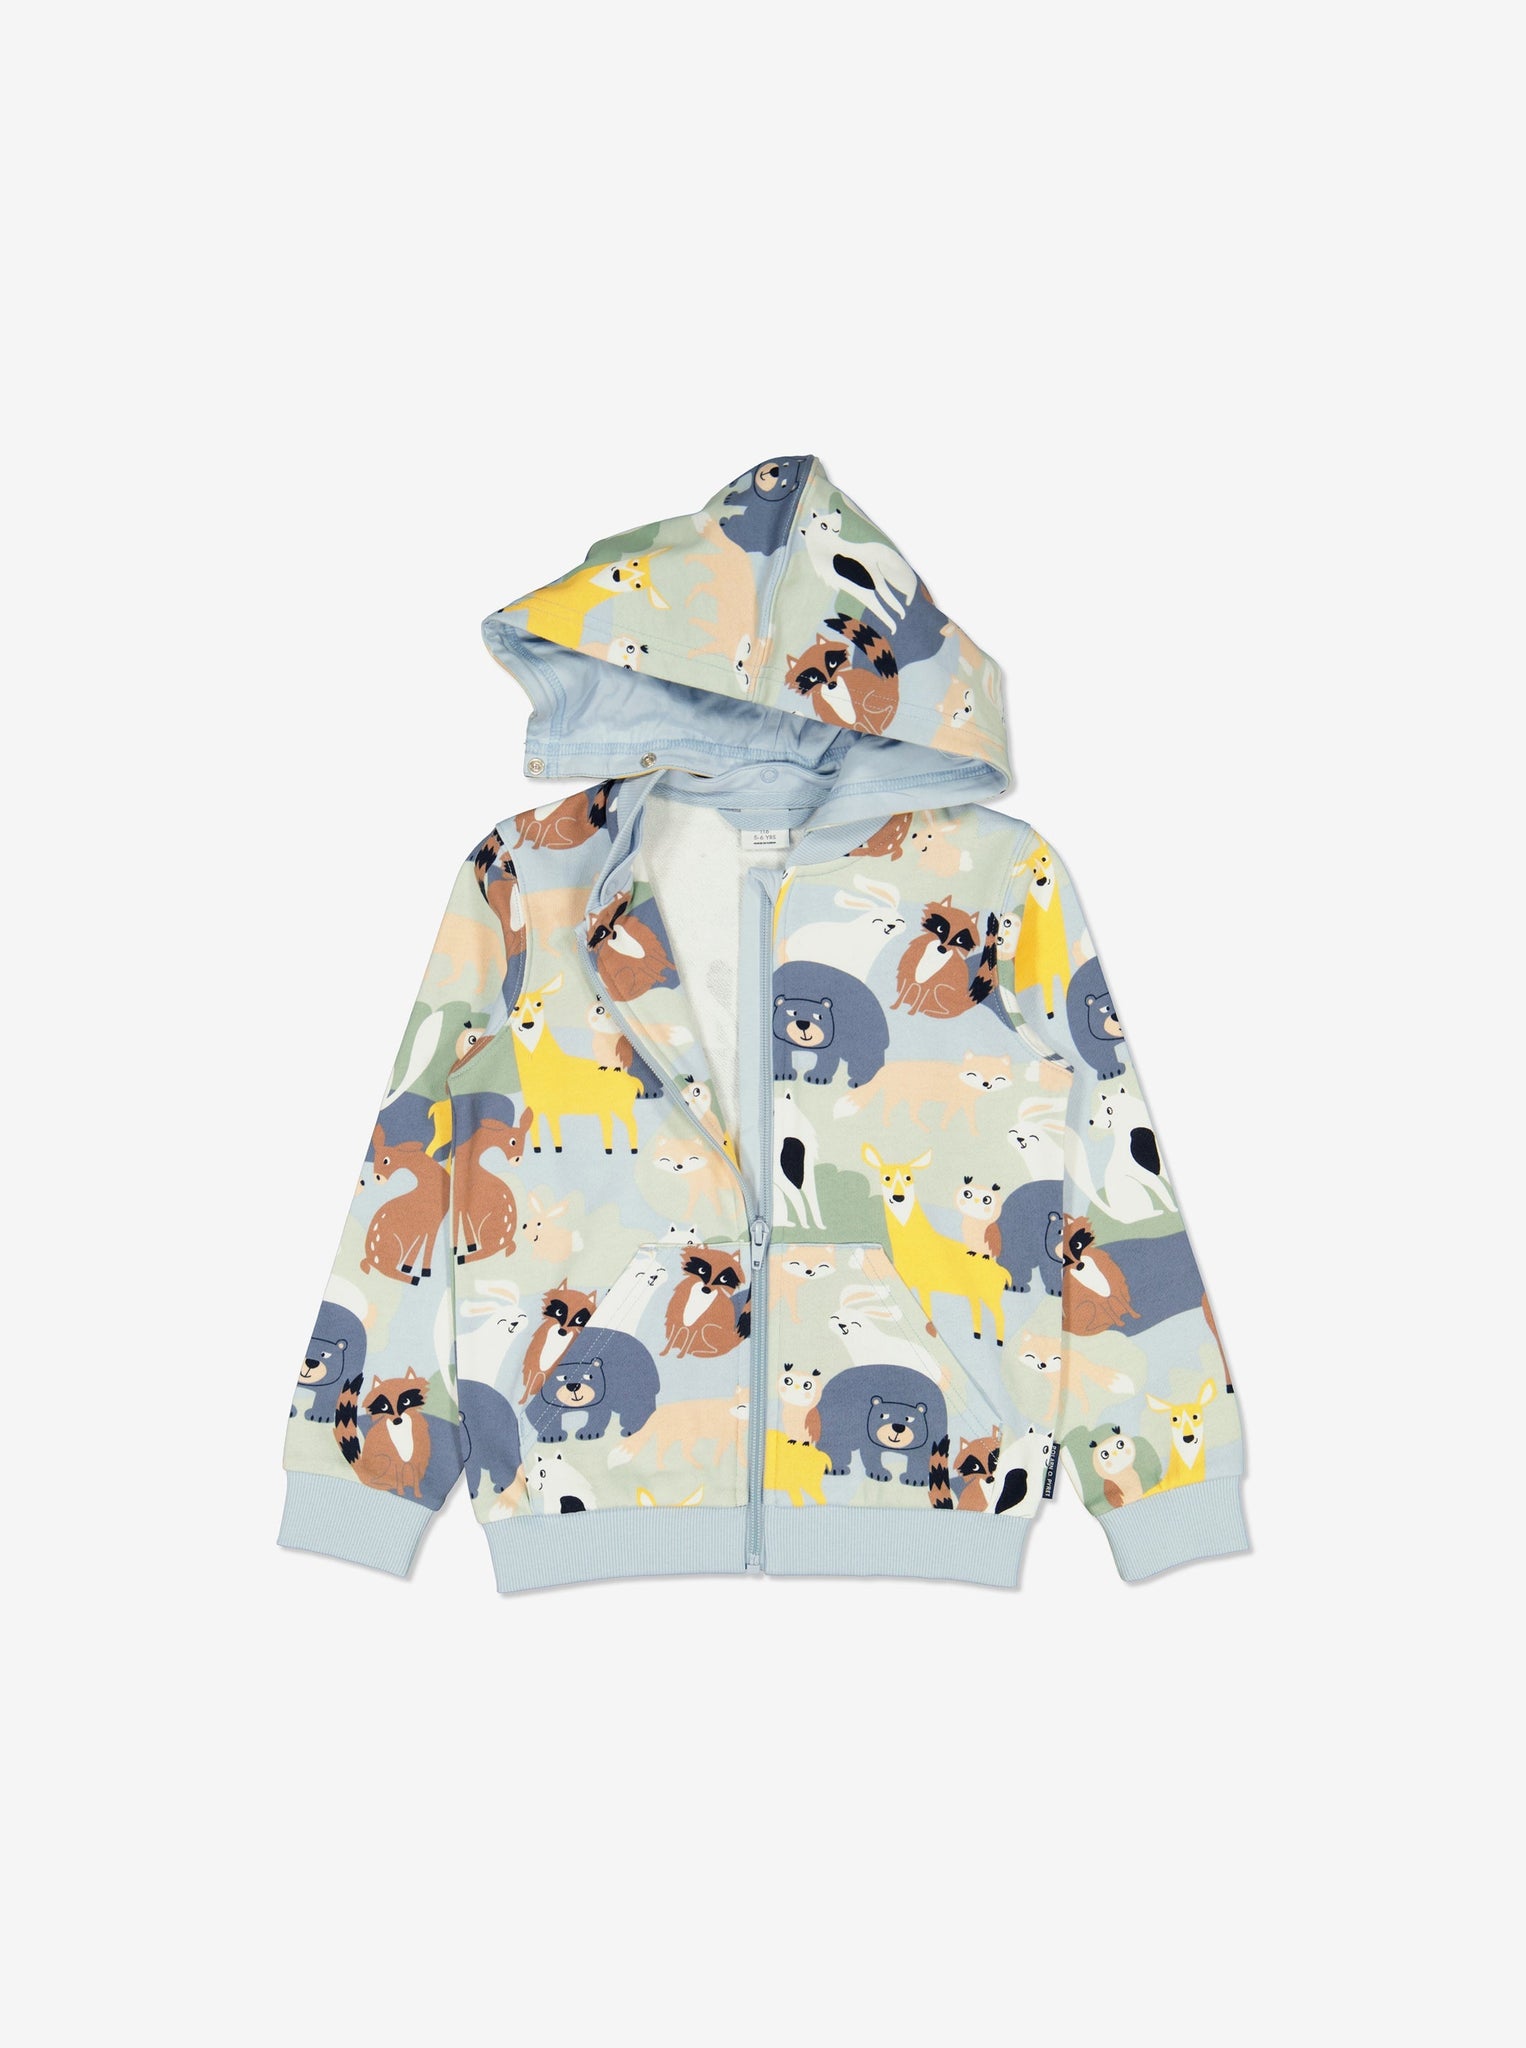  Nordic Animal Print Kids Hoodie from Polarn O. Pyret Kidswear. Made using ethically sourced materials.